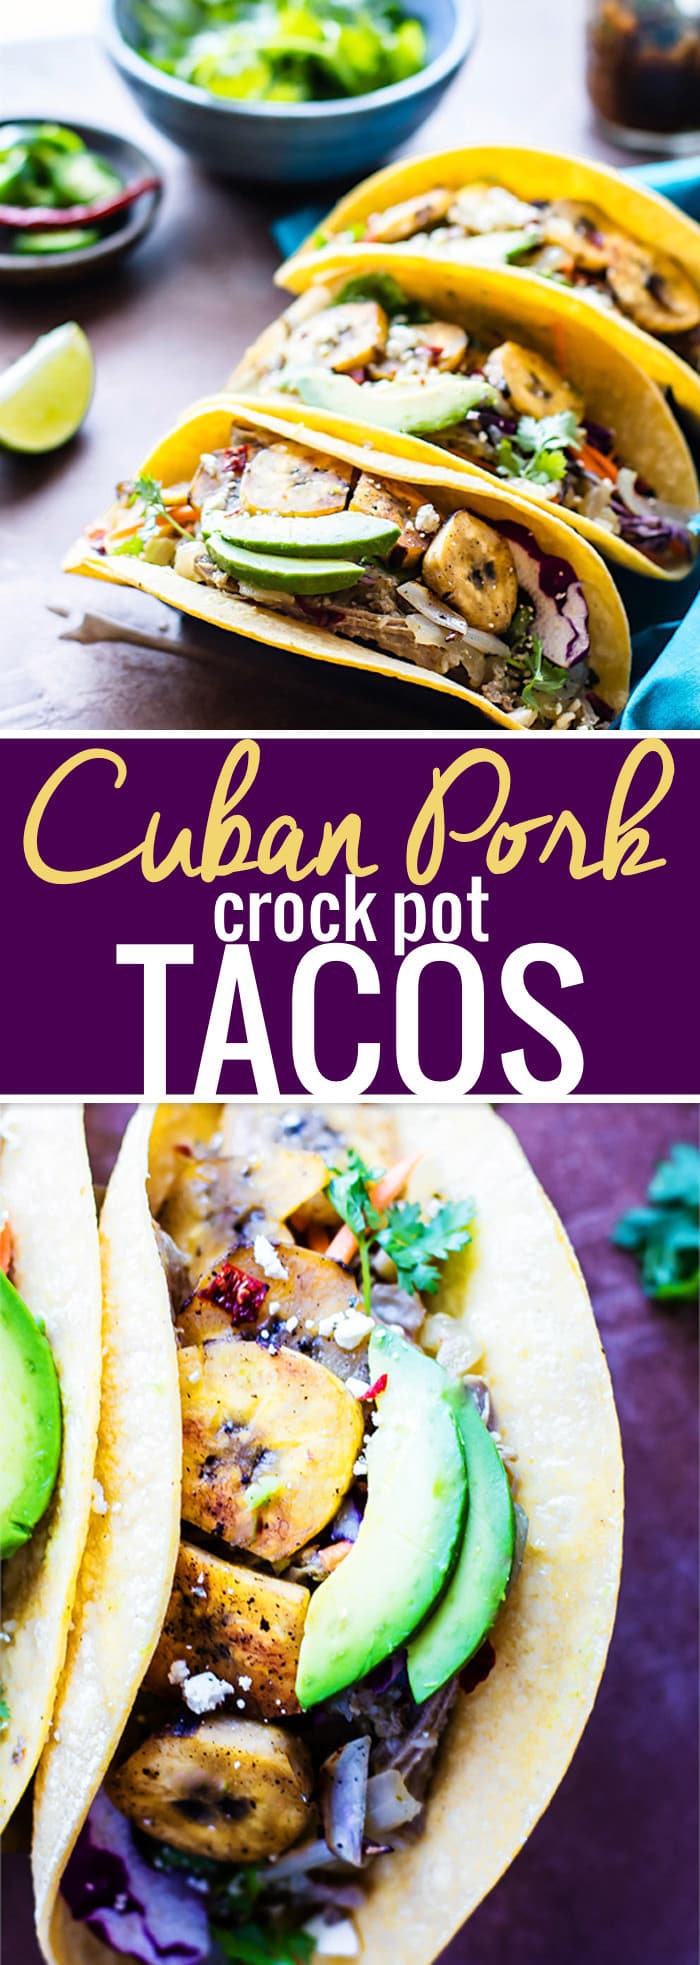 Healthy and Easy Gluten free Cuban Pork tacos! Made with simple ingredients and tons of flavor! A simple meal that is great to feed a crowd, light, and delicious! Clean eating recipe and a family dinner favorite. @cottercrunch